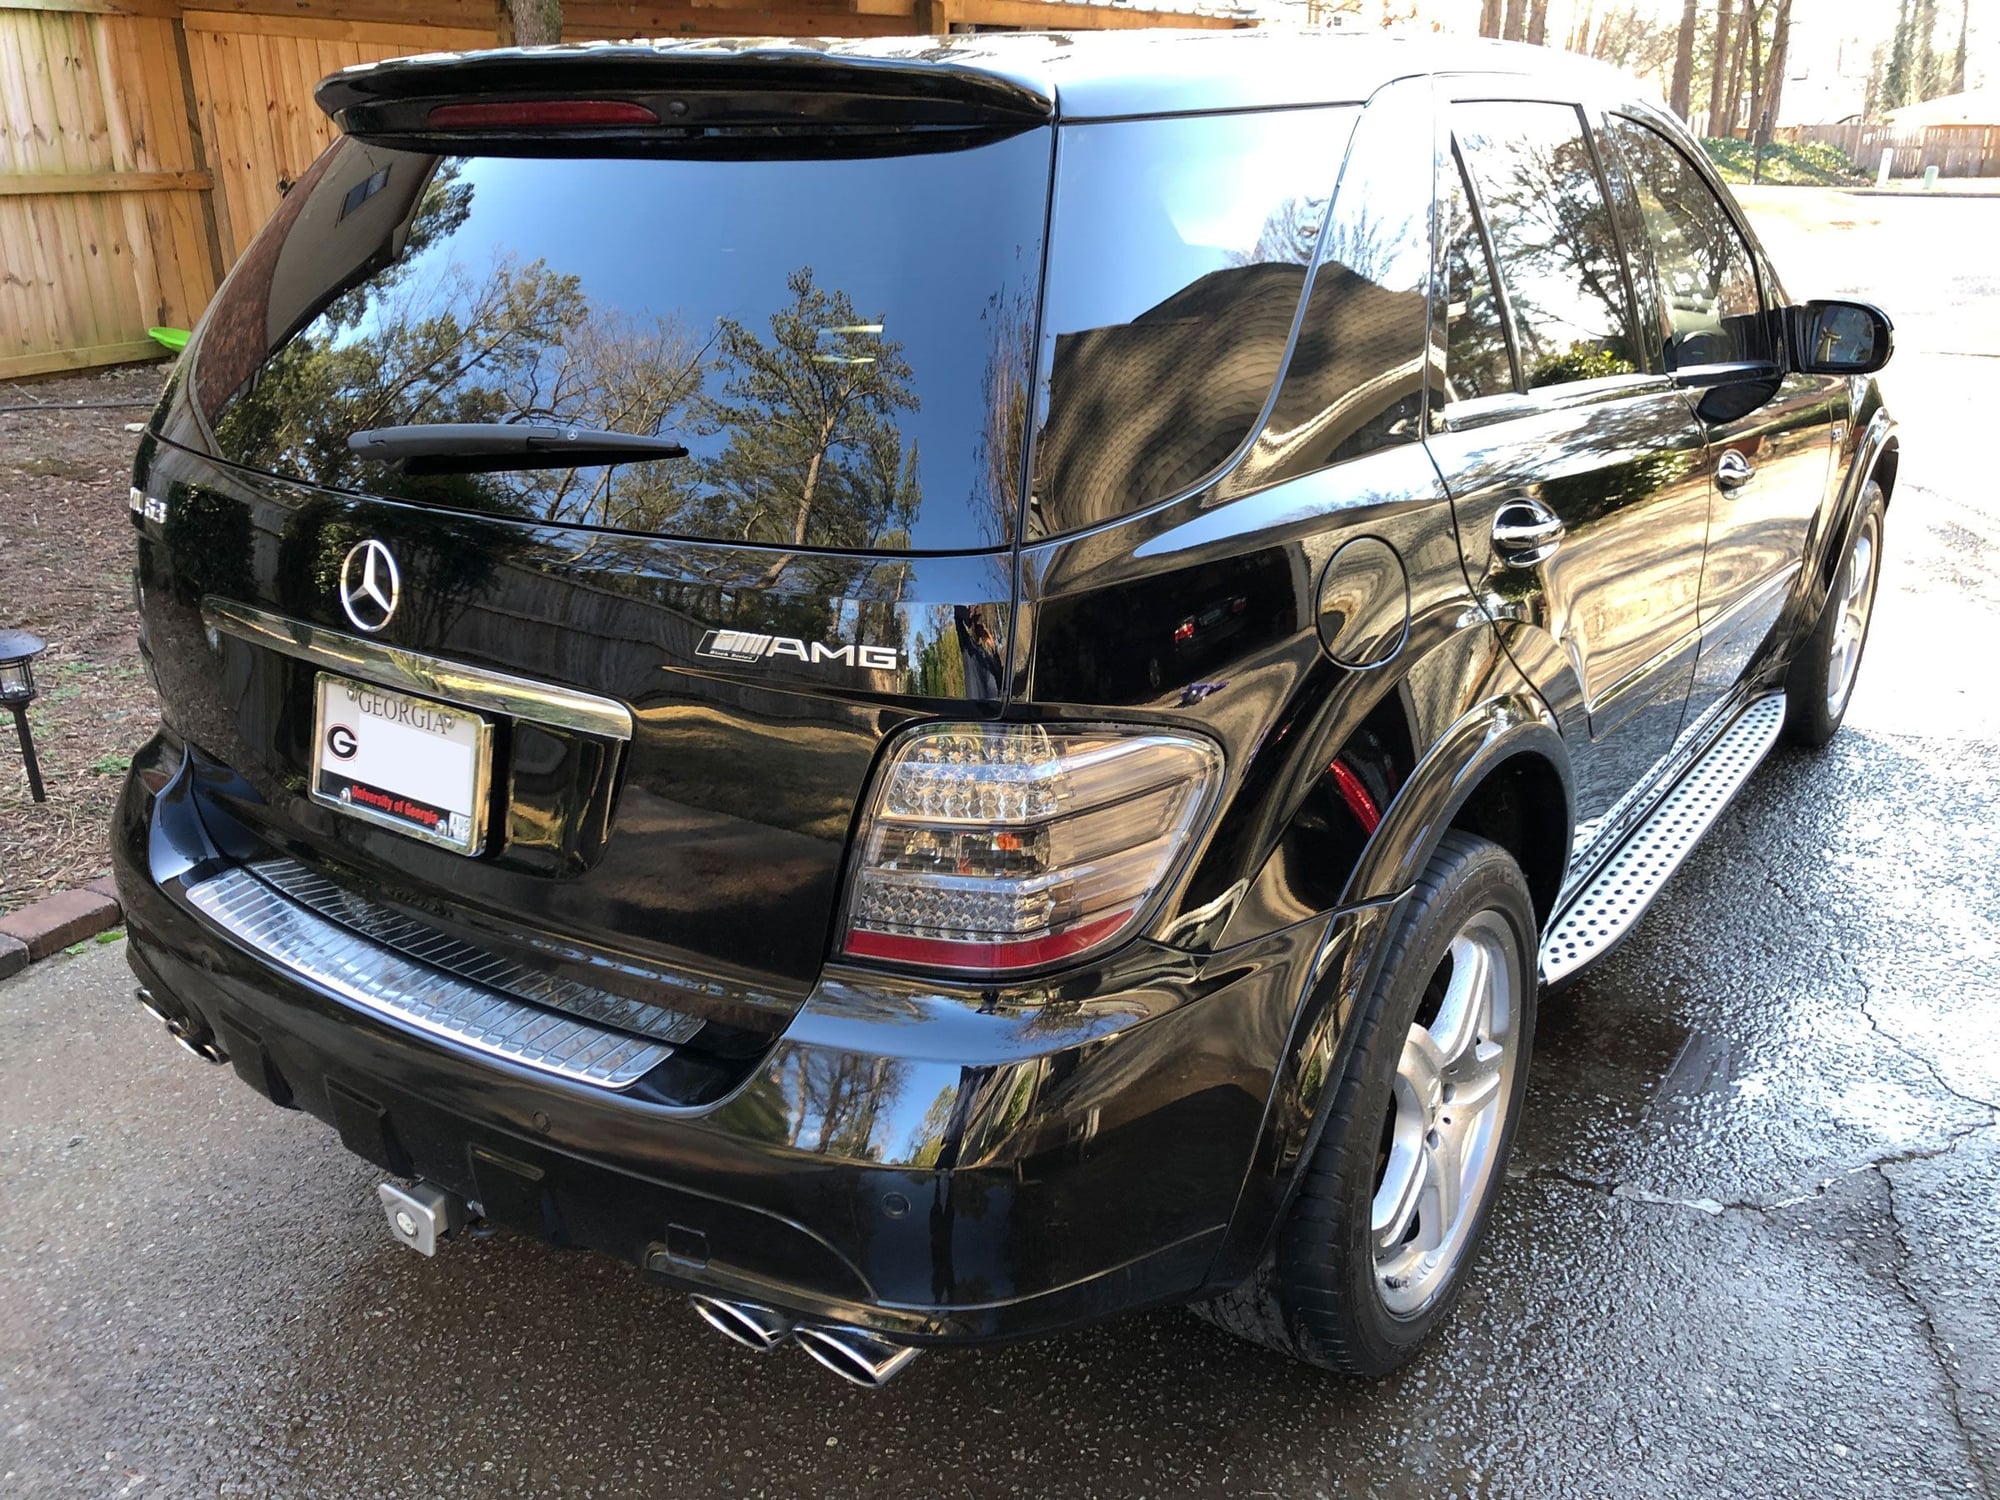 2008 Mercedes-Benz ML63 AMG - ML63 AMG (rare), Only one with miles and reduced price - Used - VIN 4JGBB77E88A359532 - 82,000 Miles - 8 cyl - AWD - Automatic - Wagon - Black - Marietta, GA 30068, United States